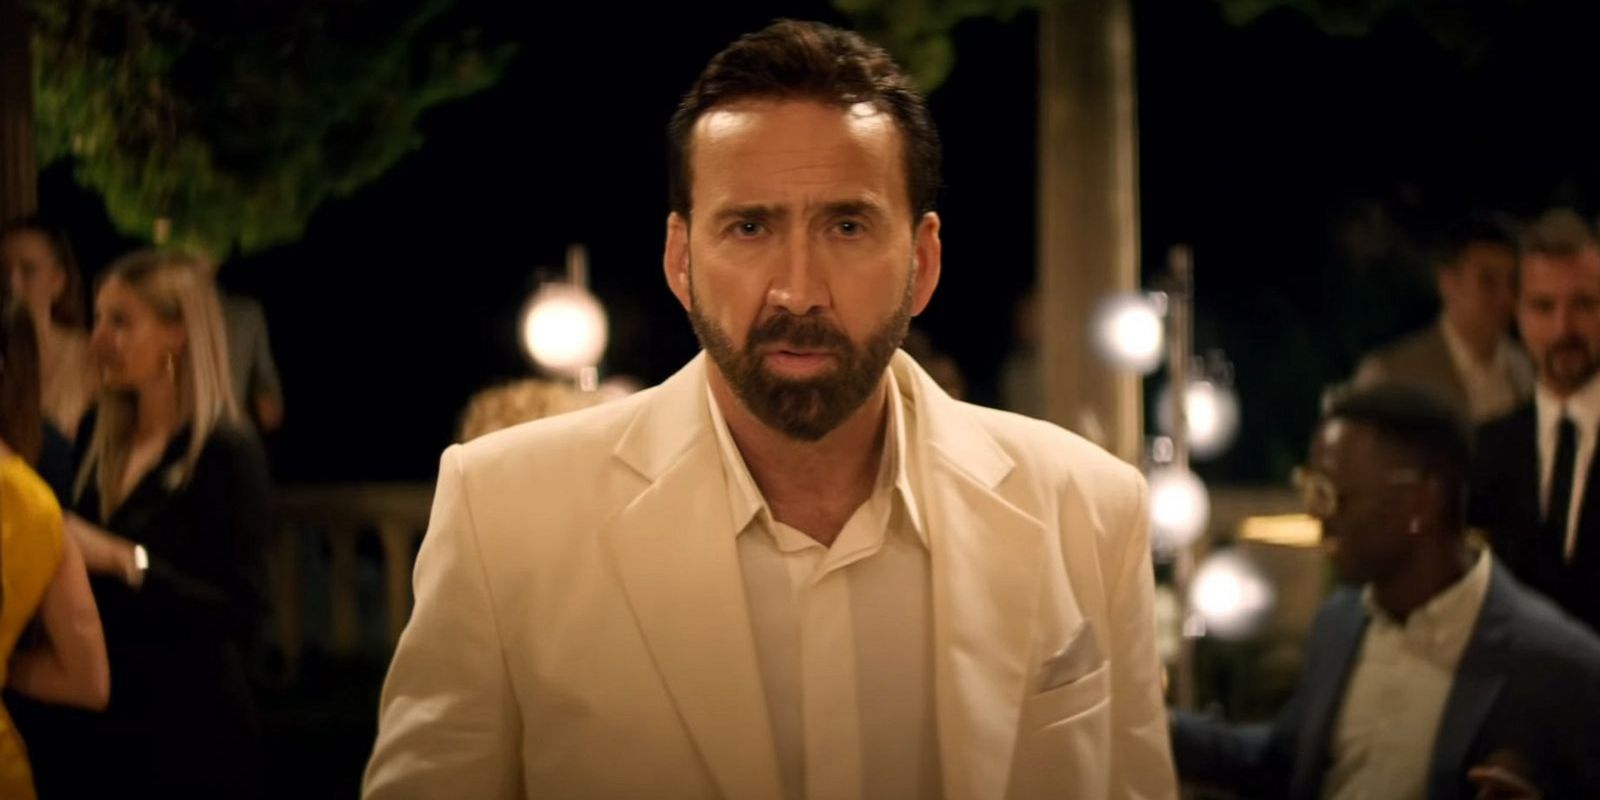 Nic Cage in TUWOMT wearing white tuxedo at a party